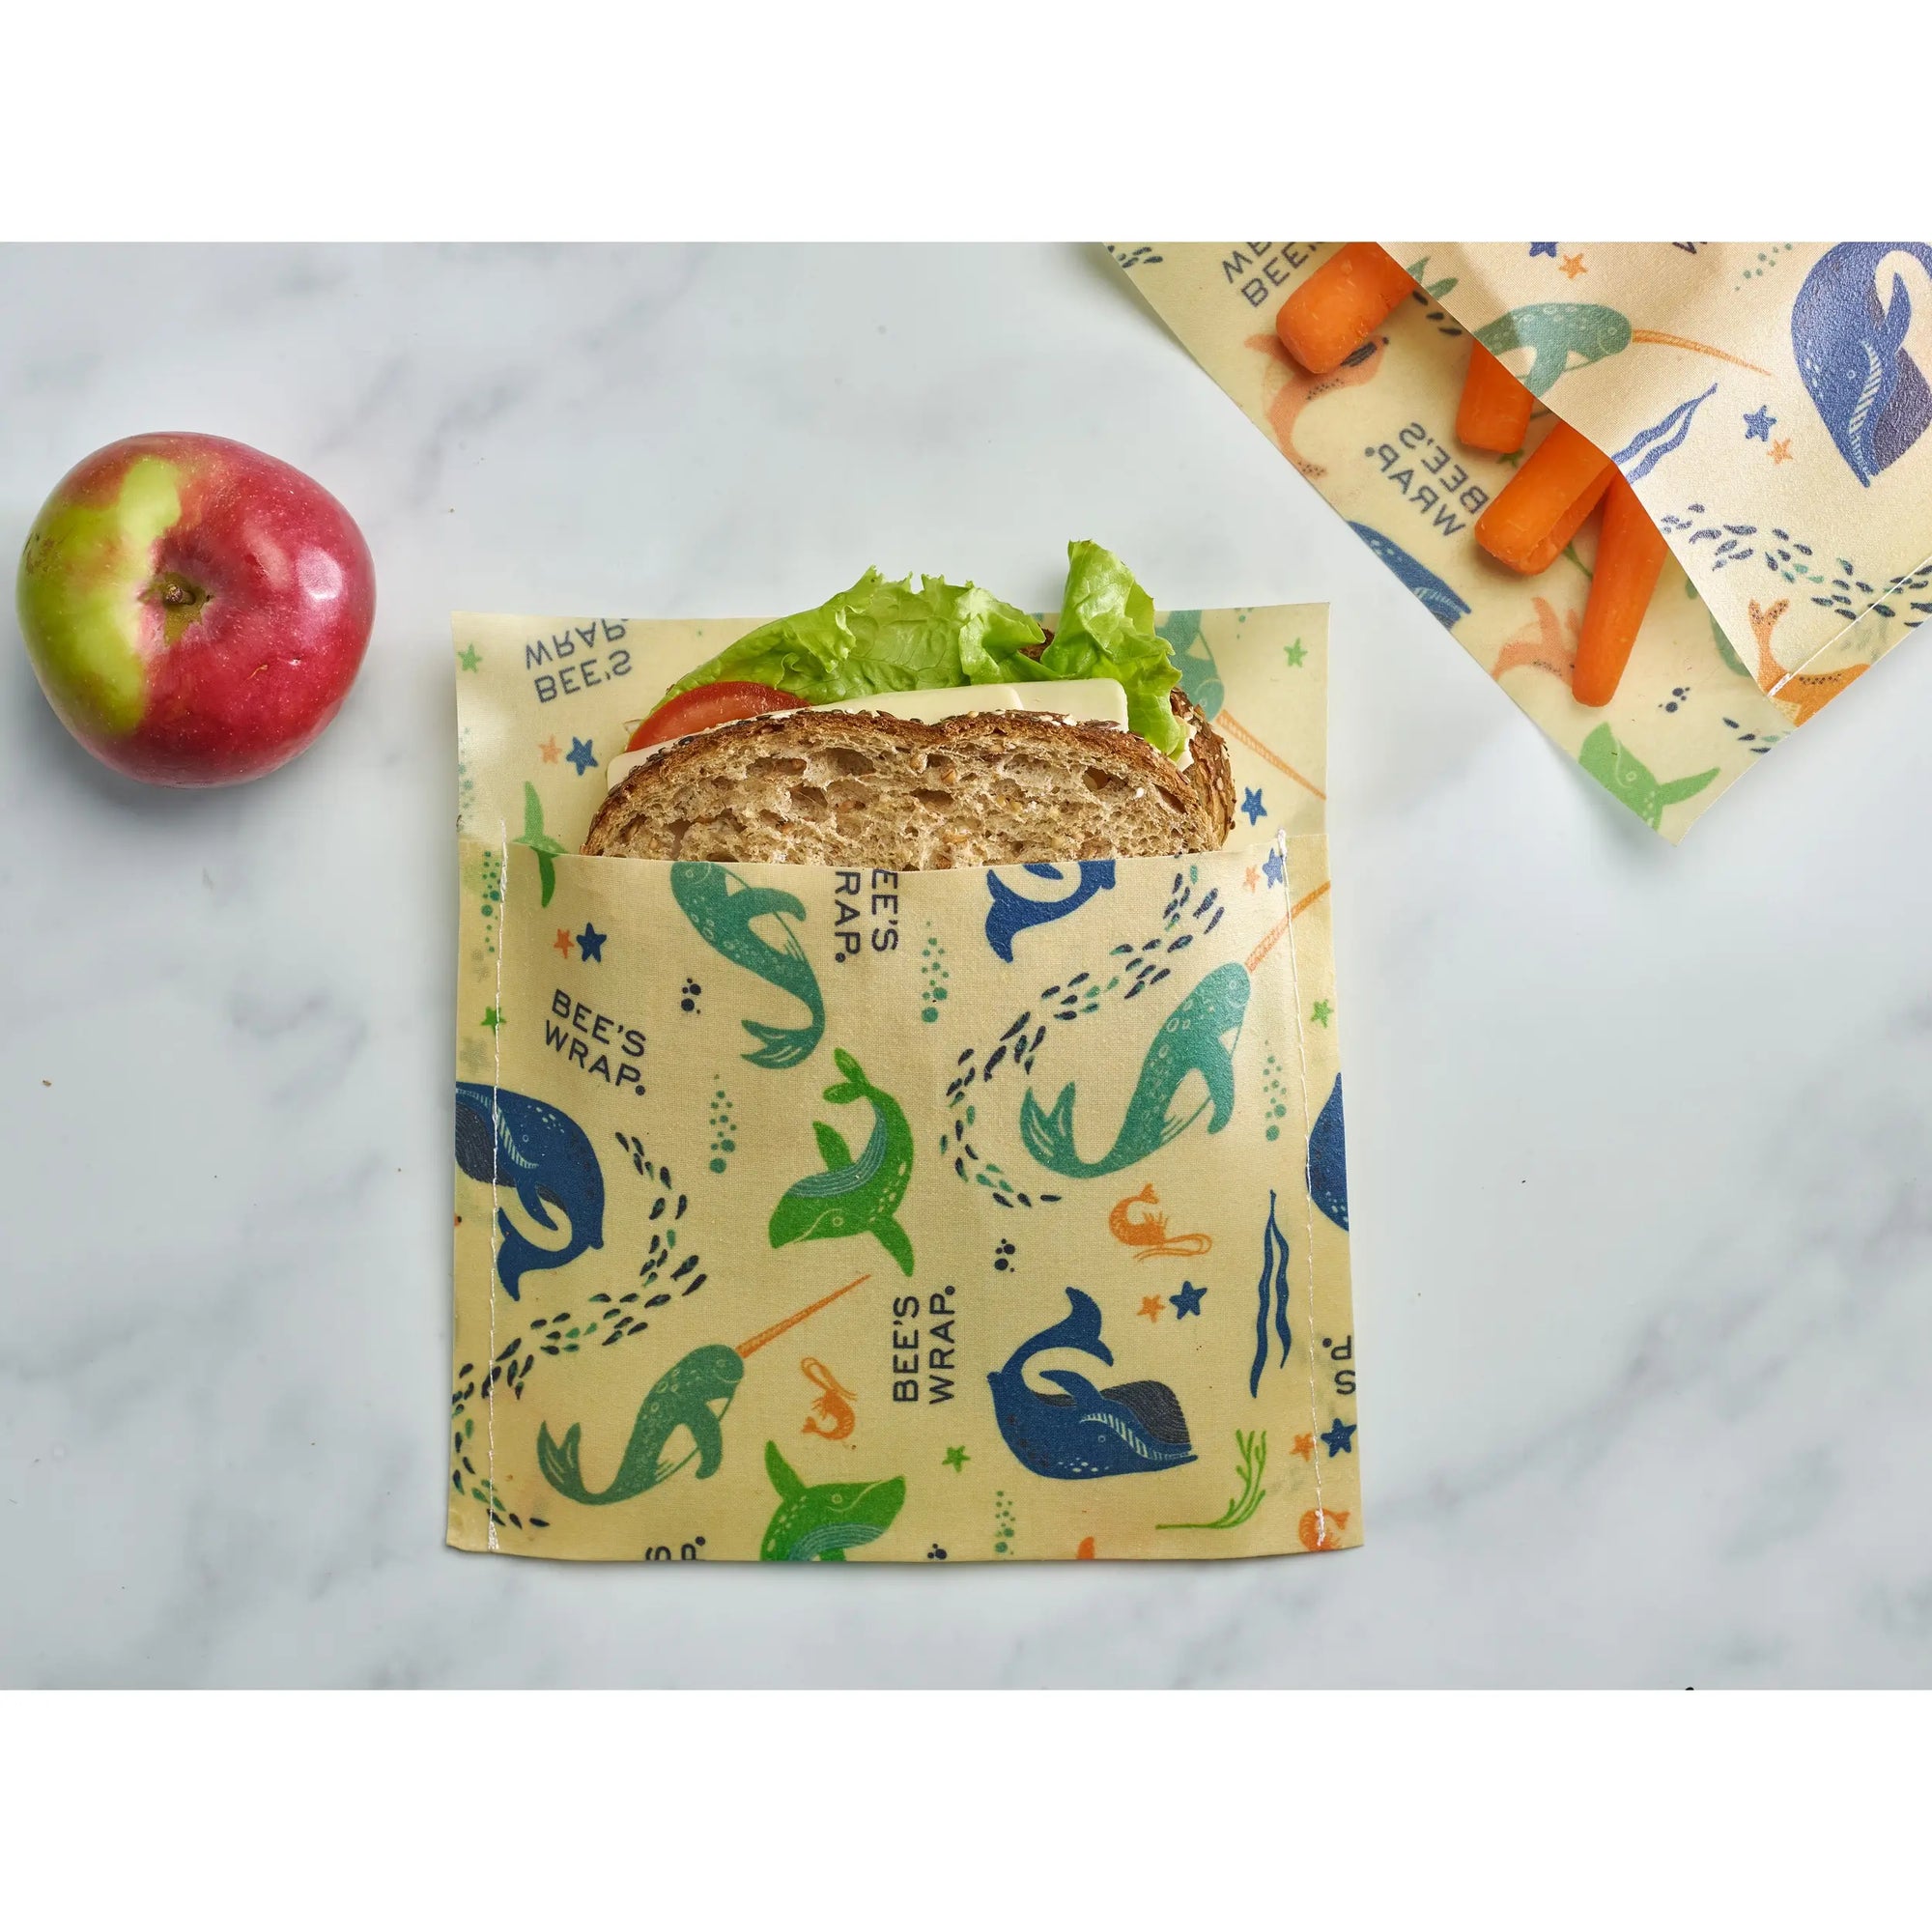 Snack and Sandwich Wraps